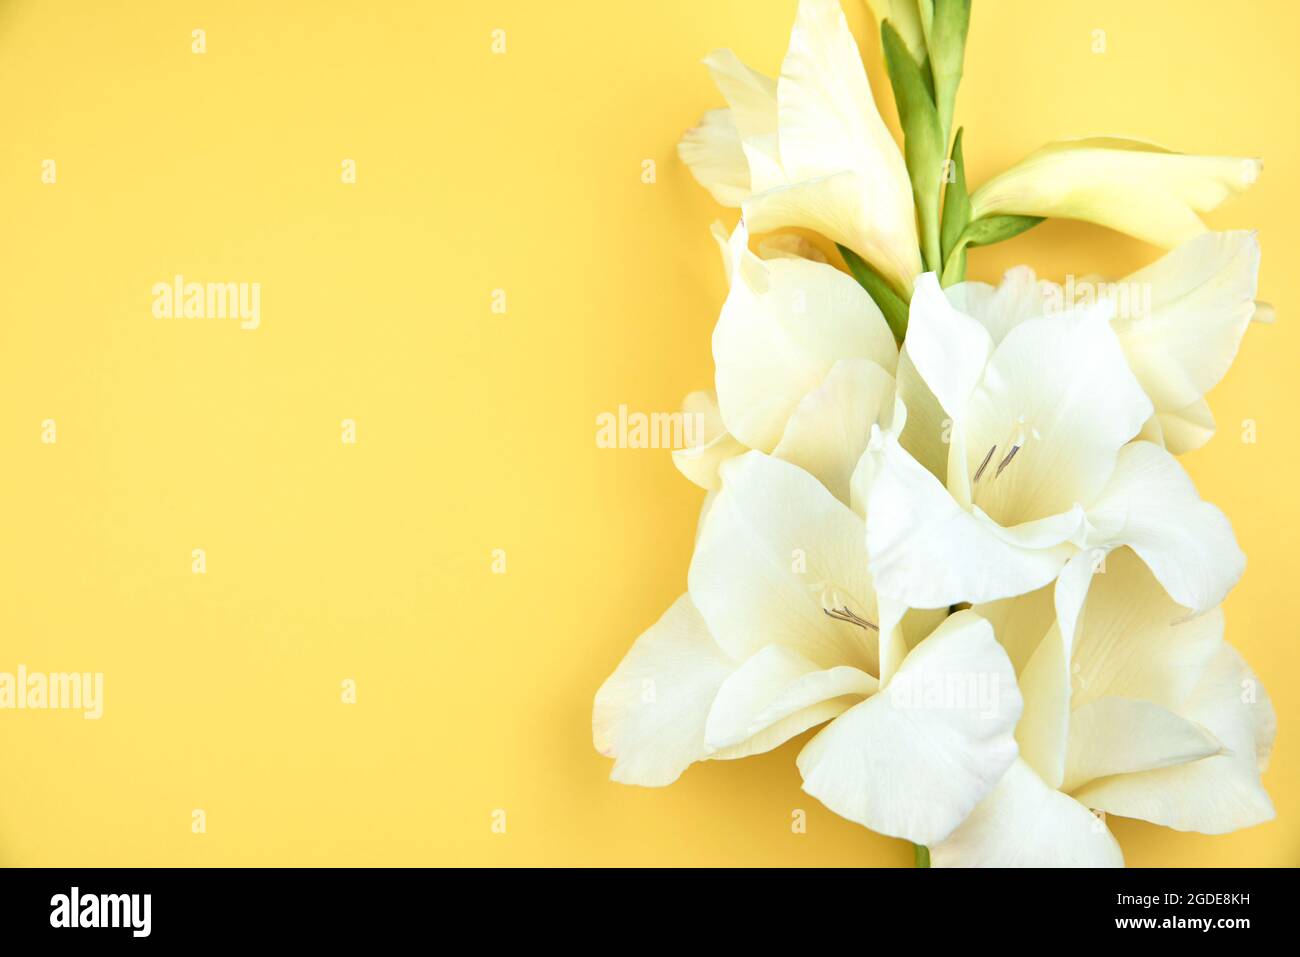 White delicate gladiolus flowers on a yellow background, copy space. Stock Photo